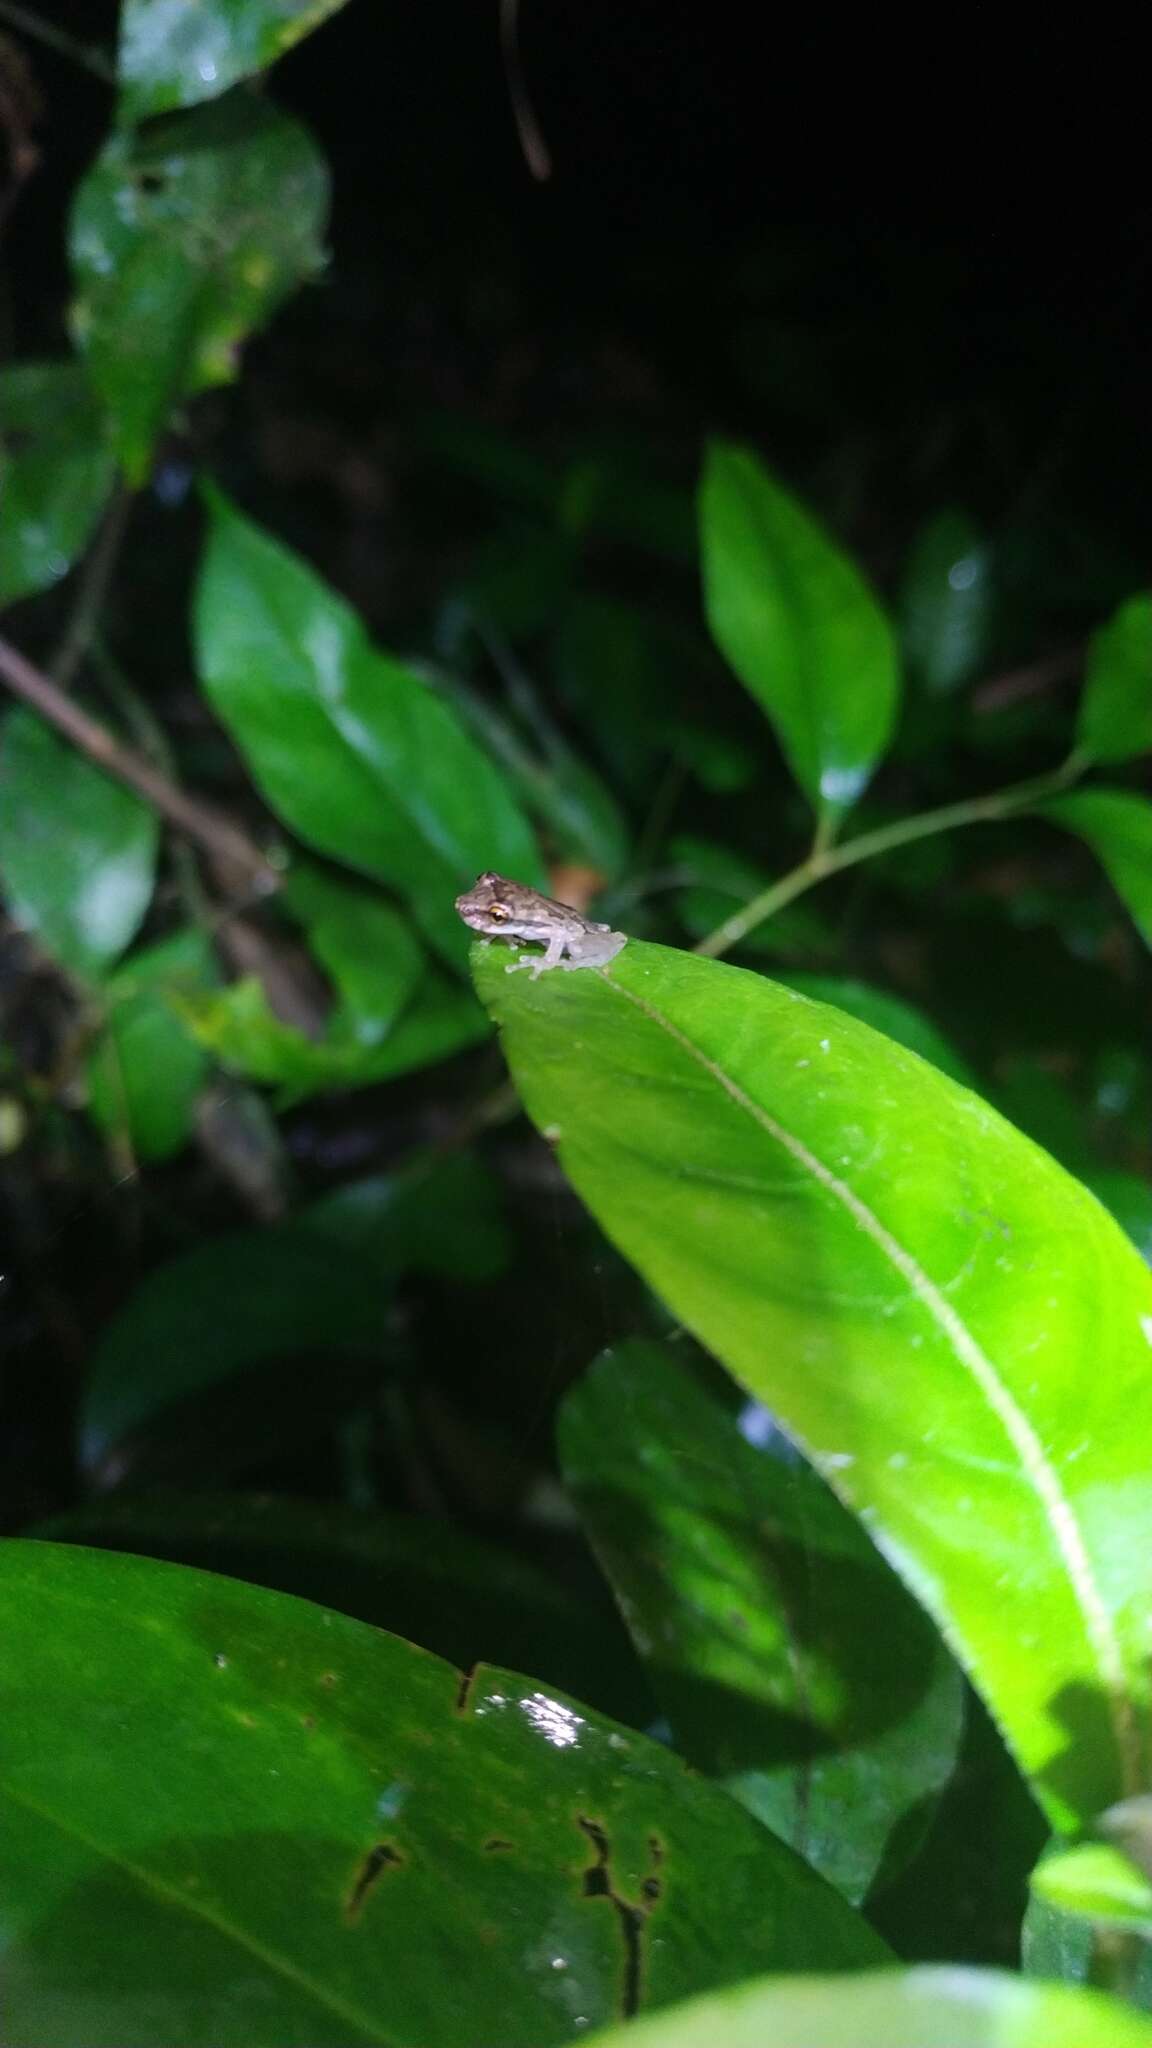 Image of Bandeirantes Snouted Treefrog